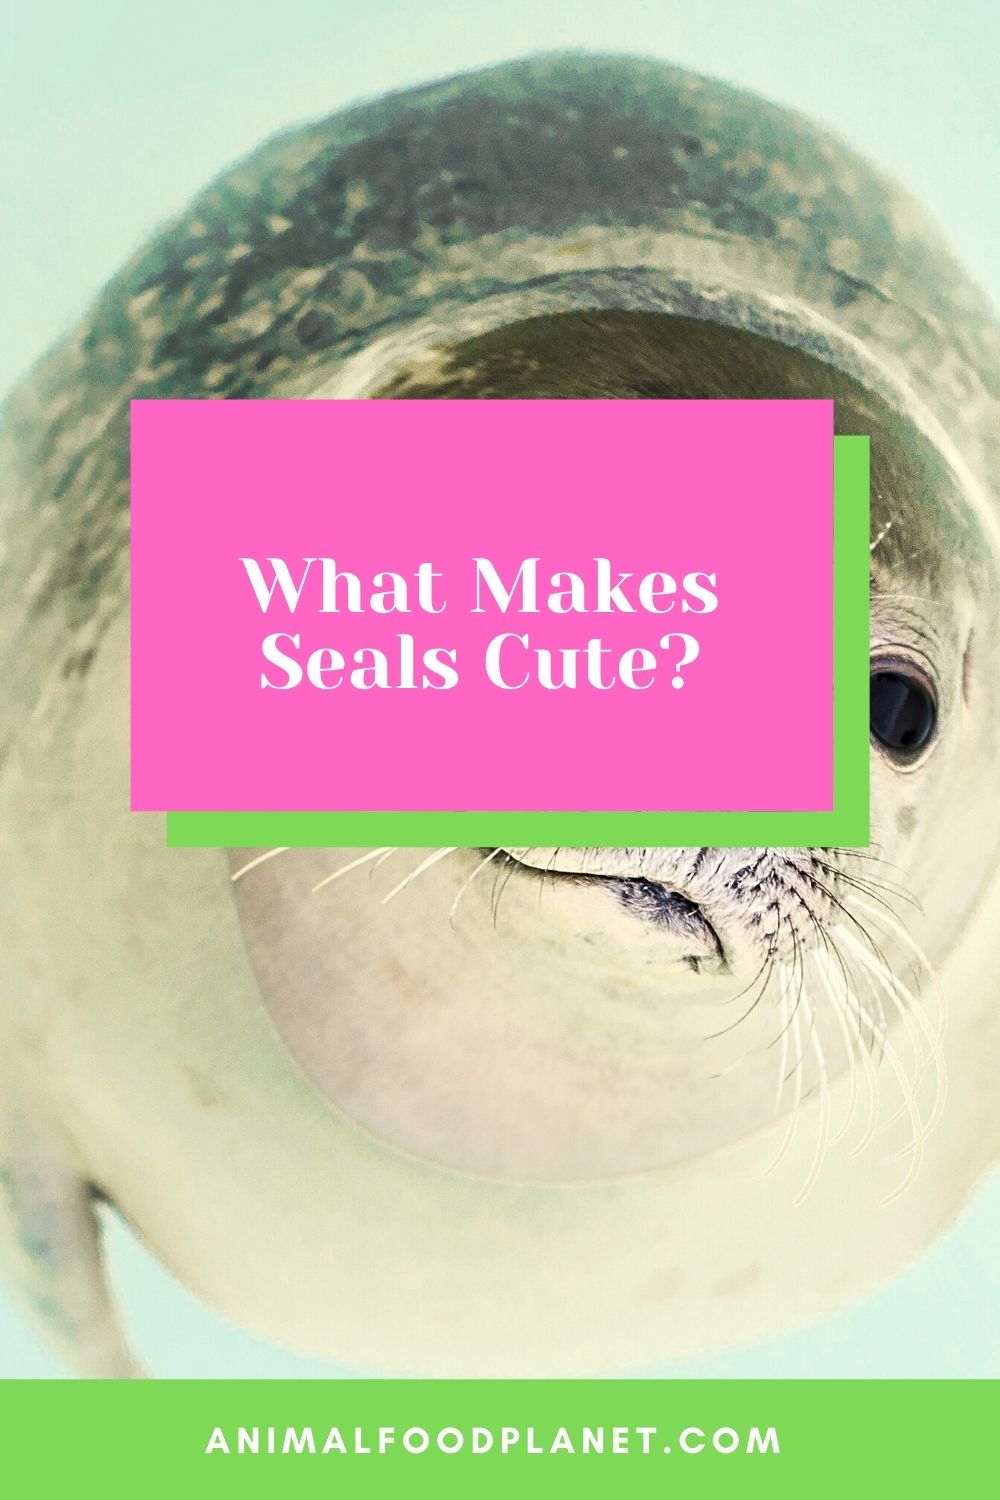 Why Are Seals So Cute?